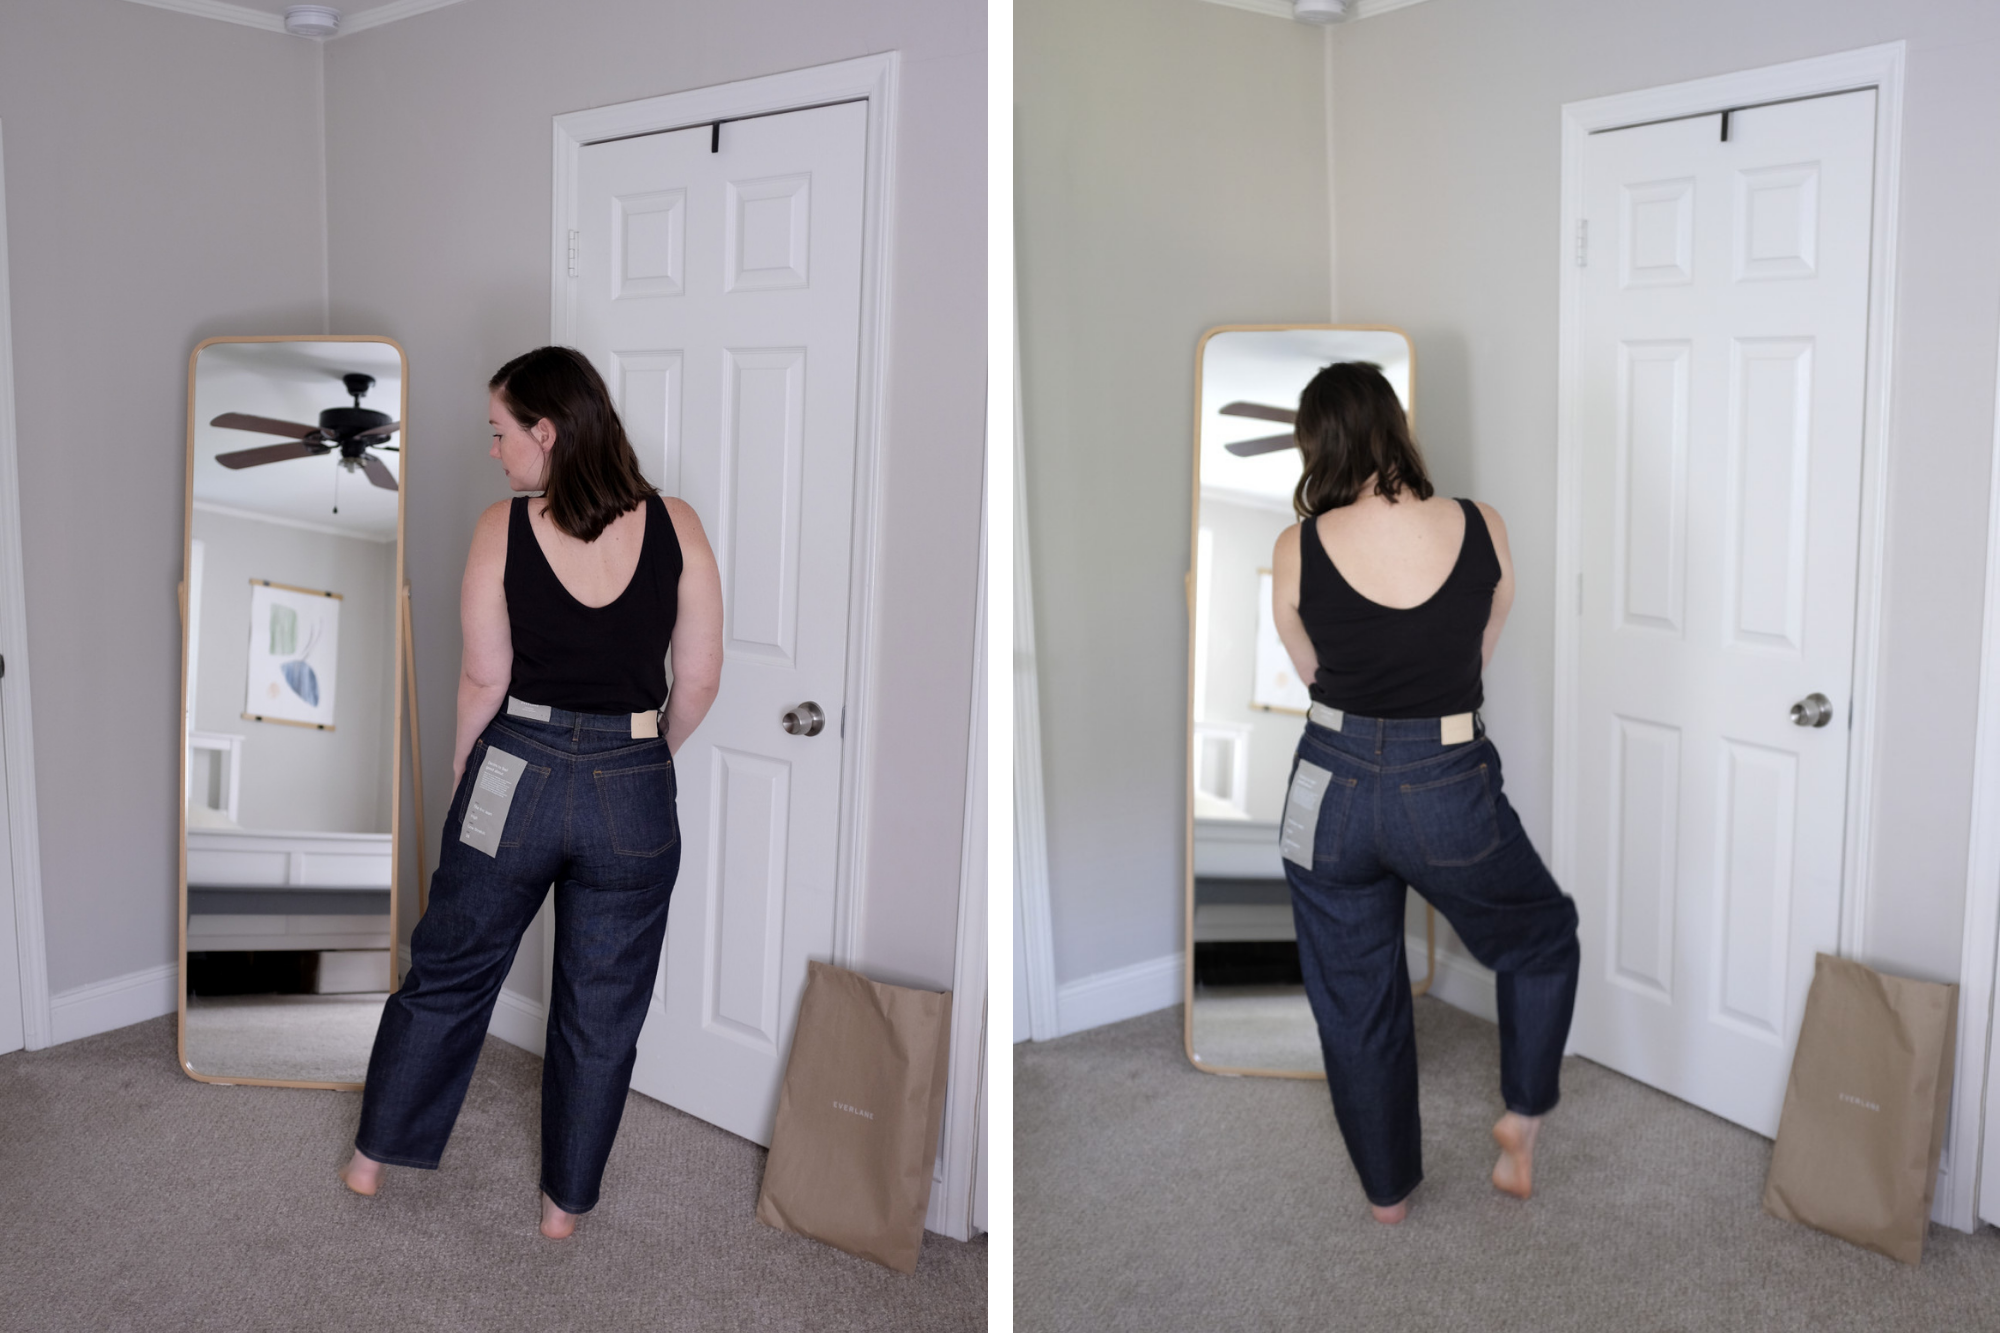 Two side-by-side photos of Alyssa wearing the jeans in front of her closet door and mirror. In the left photo she is facing away from the camera and left, and in the right photo she is facing the mirror away from the camera. The smaller size is tighter than the larger size.